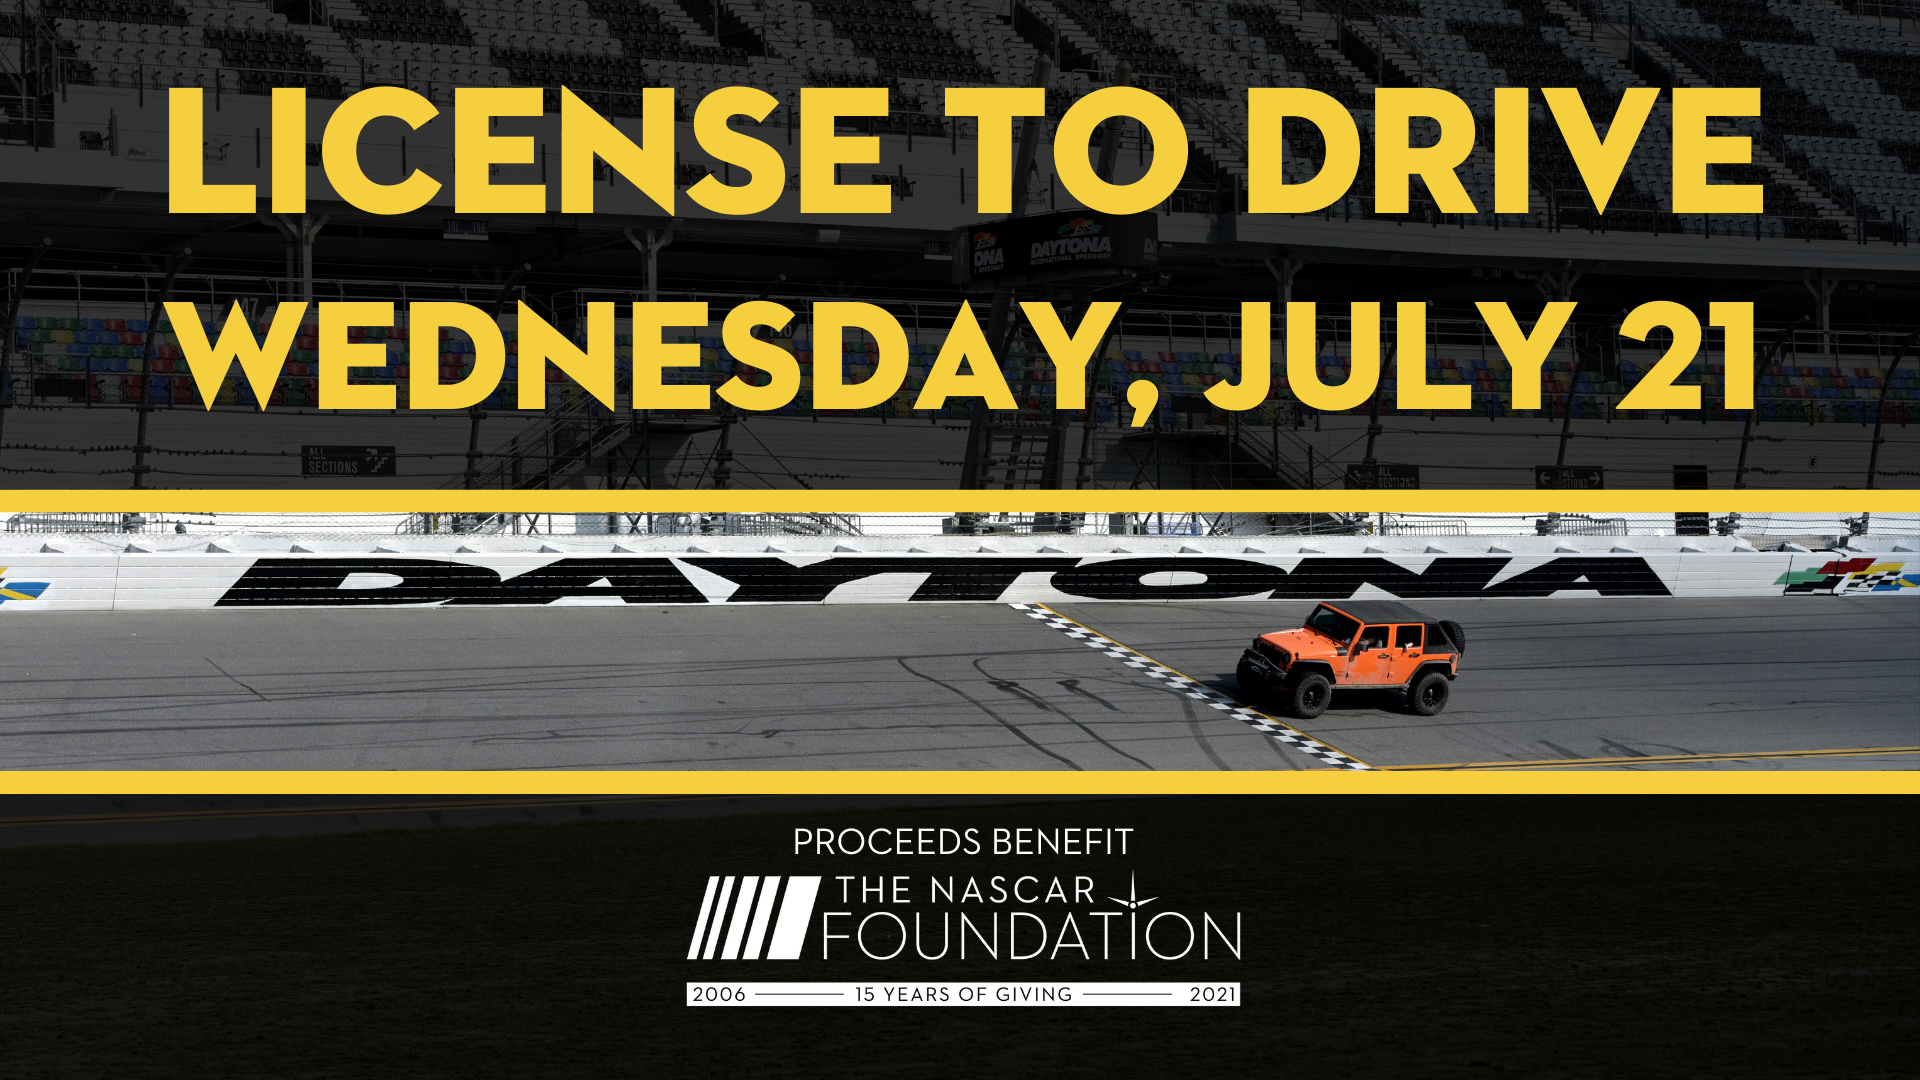 Fans to Wheel Own Vehicles Around Daytona International Speedway as NASCAR Foundation Hosts First-Ever License to Drive Event, Wednesday, July 21